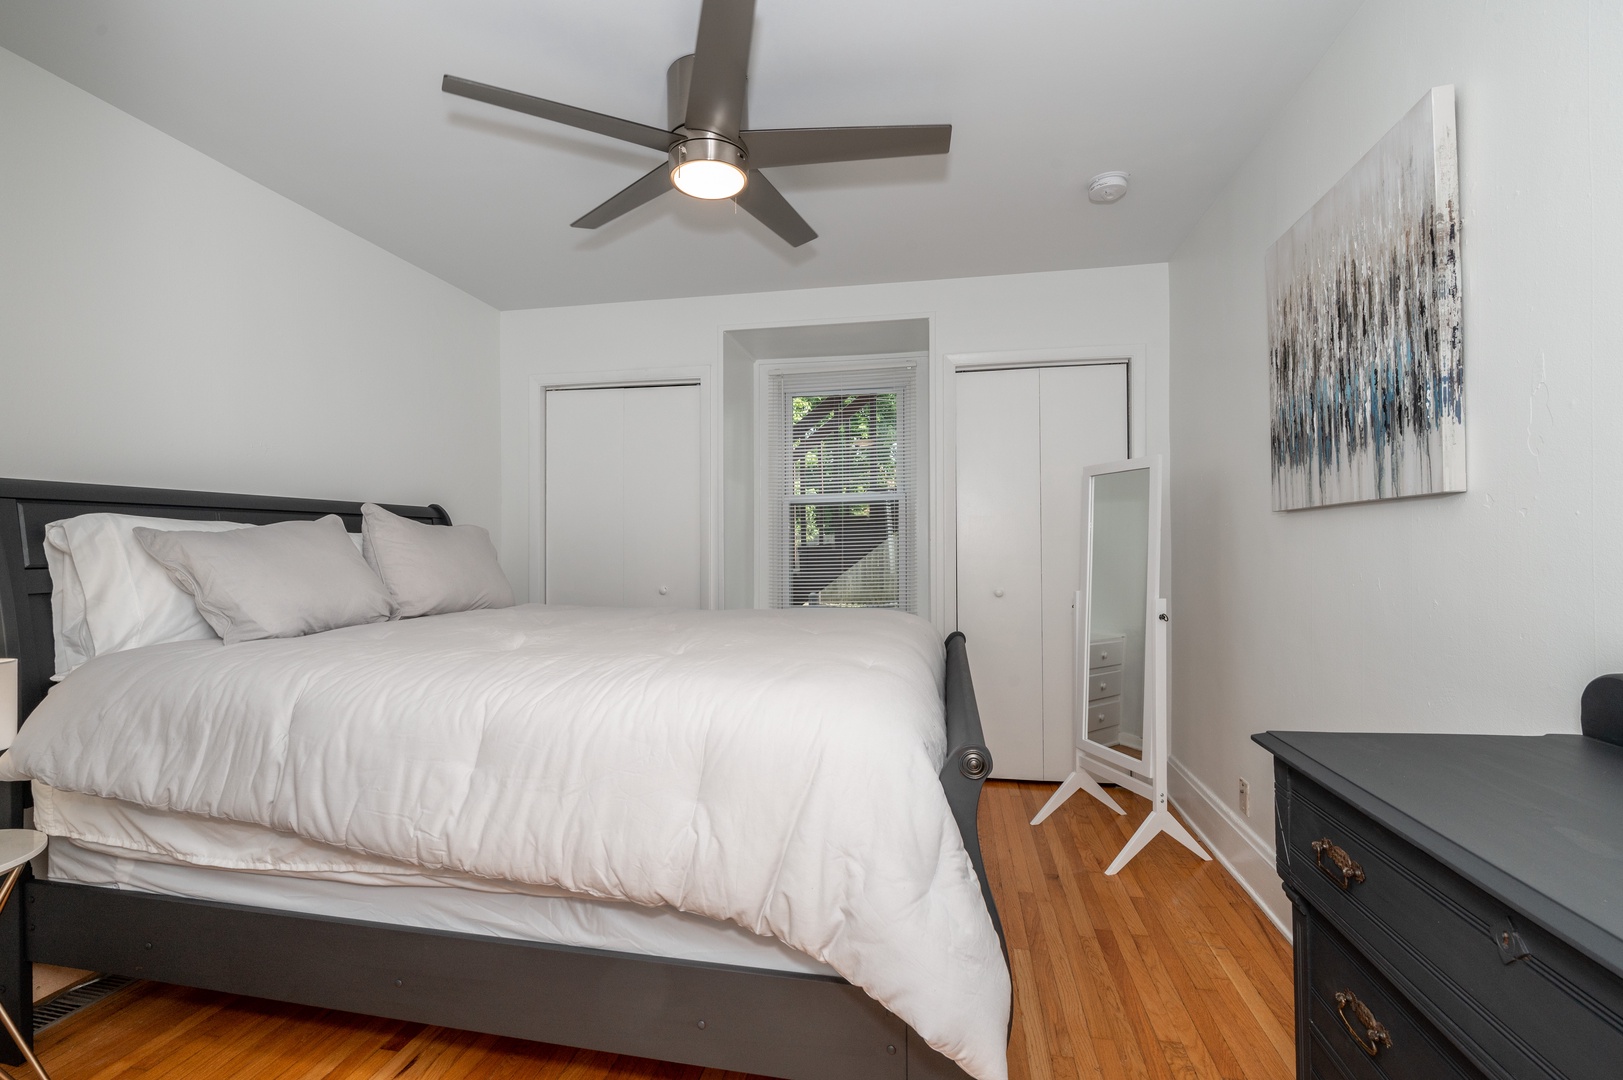 Unit 1 – The tranquil queen bedroom includes a ceiling fan & standing mirror